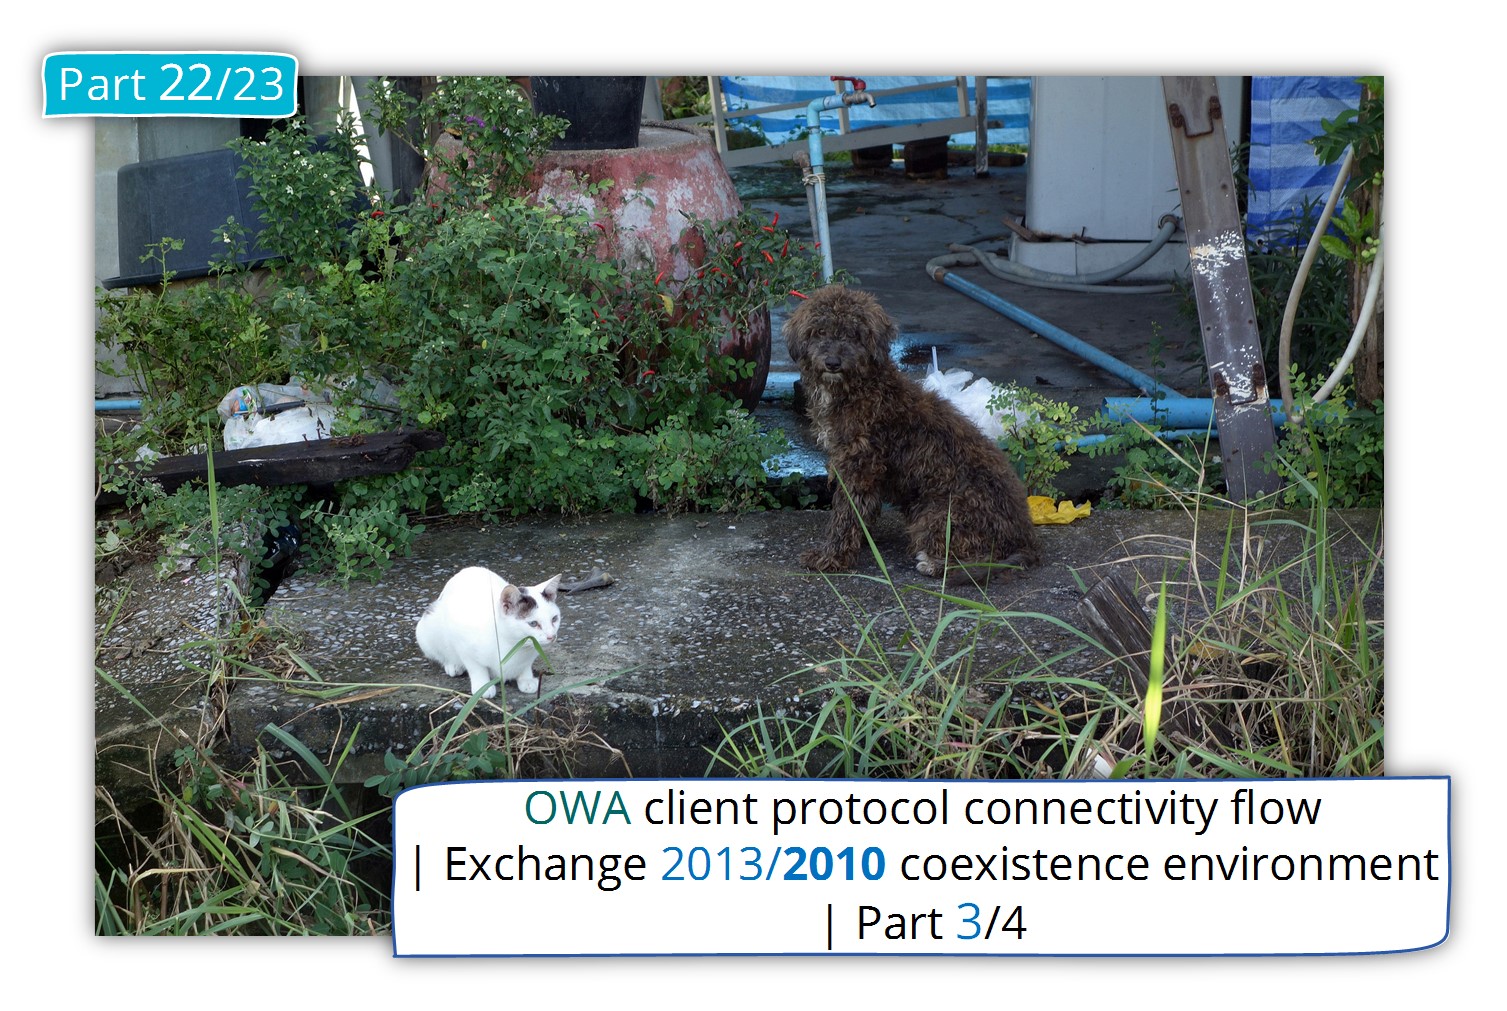 OWA client protocol connectivity flow in Exchange 2013/2010 coexistence environment | 3/4